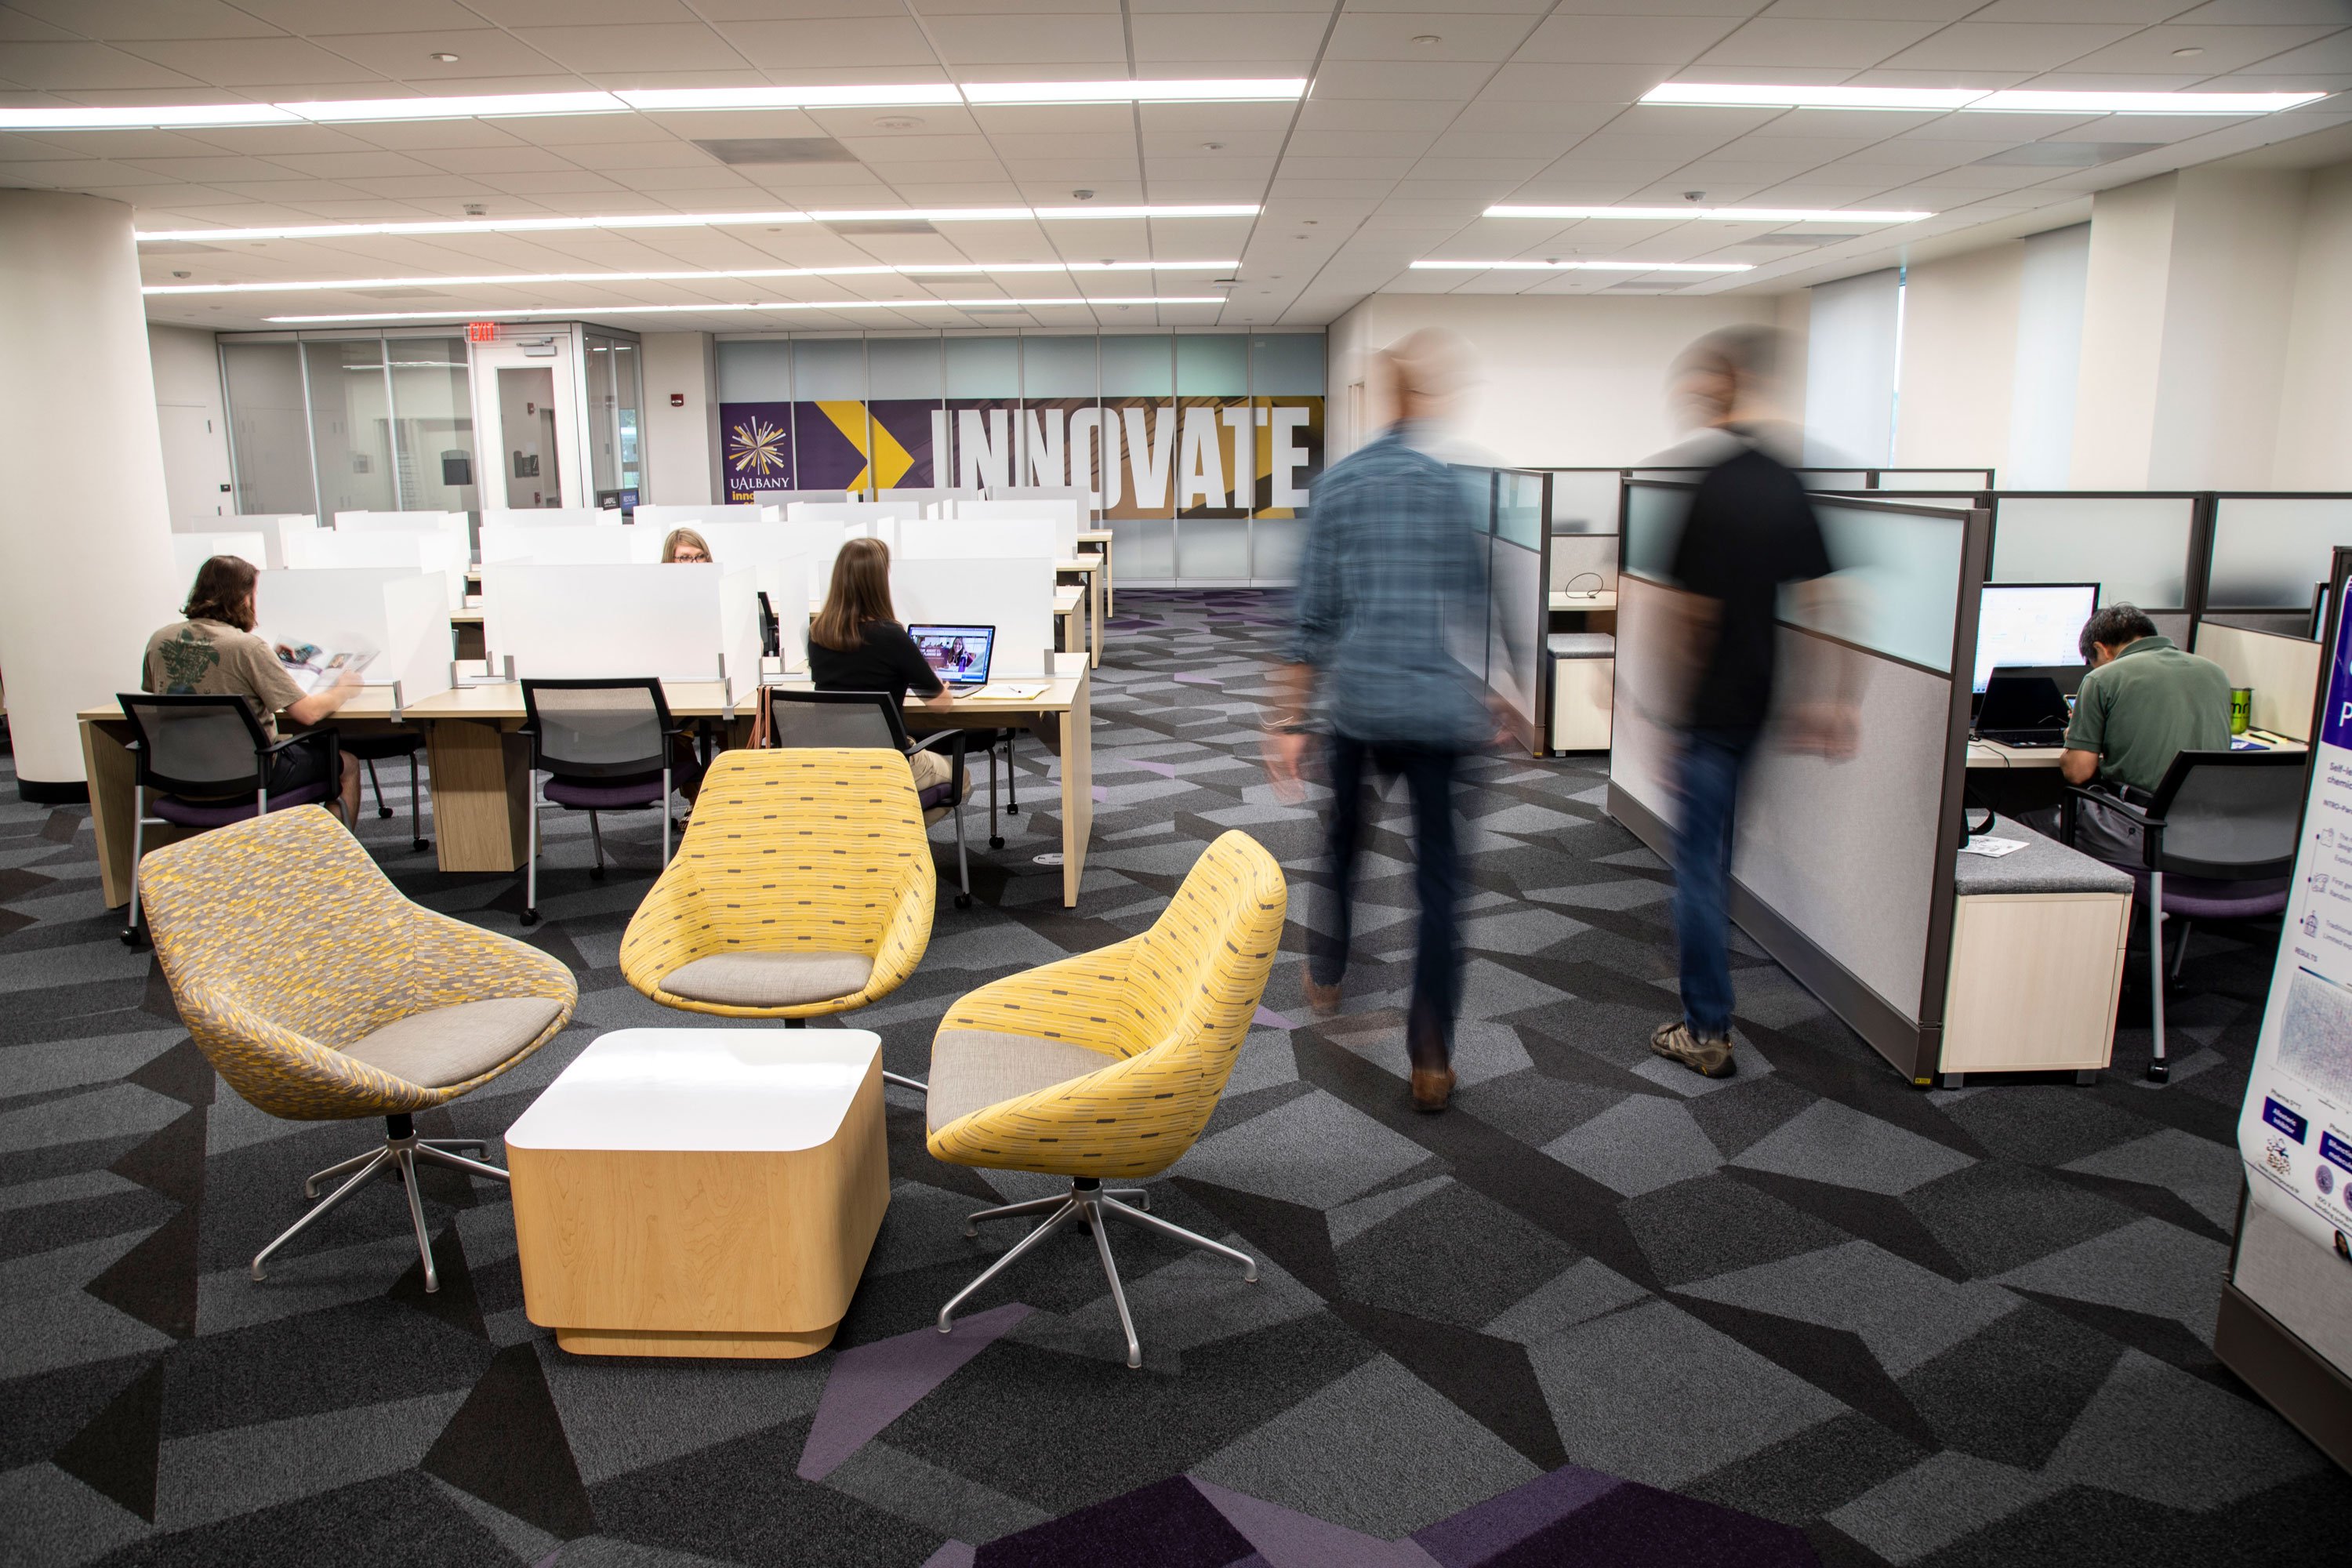 Two people are a blur as they walk through the Innovation Center. Others sit at desks around the space. The "innovate" sign is visible in the background.